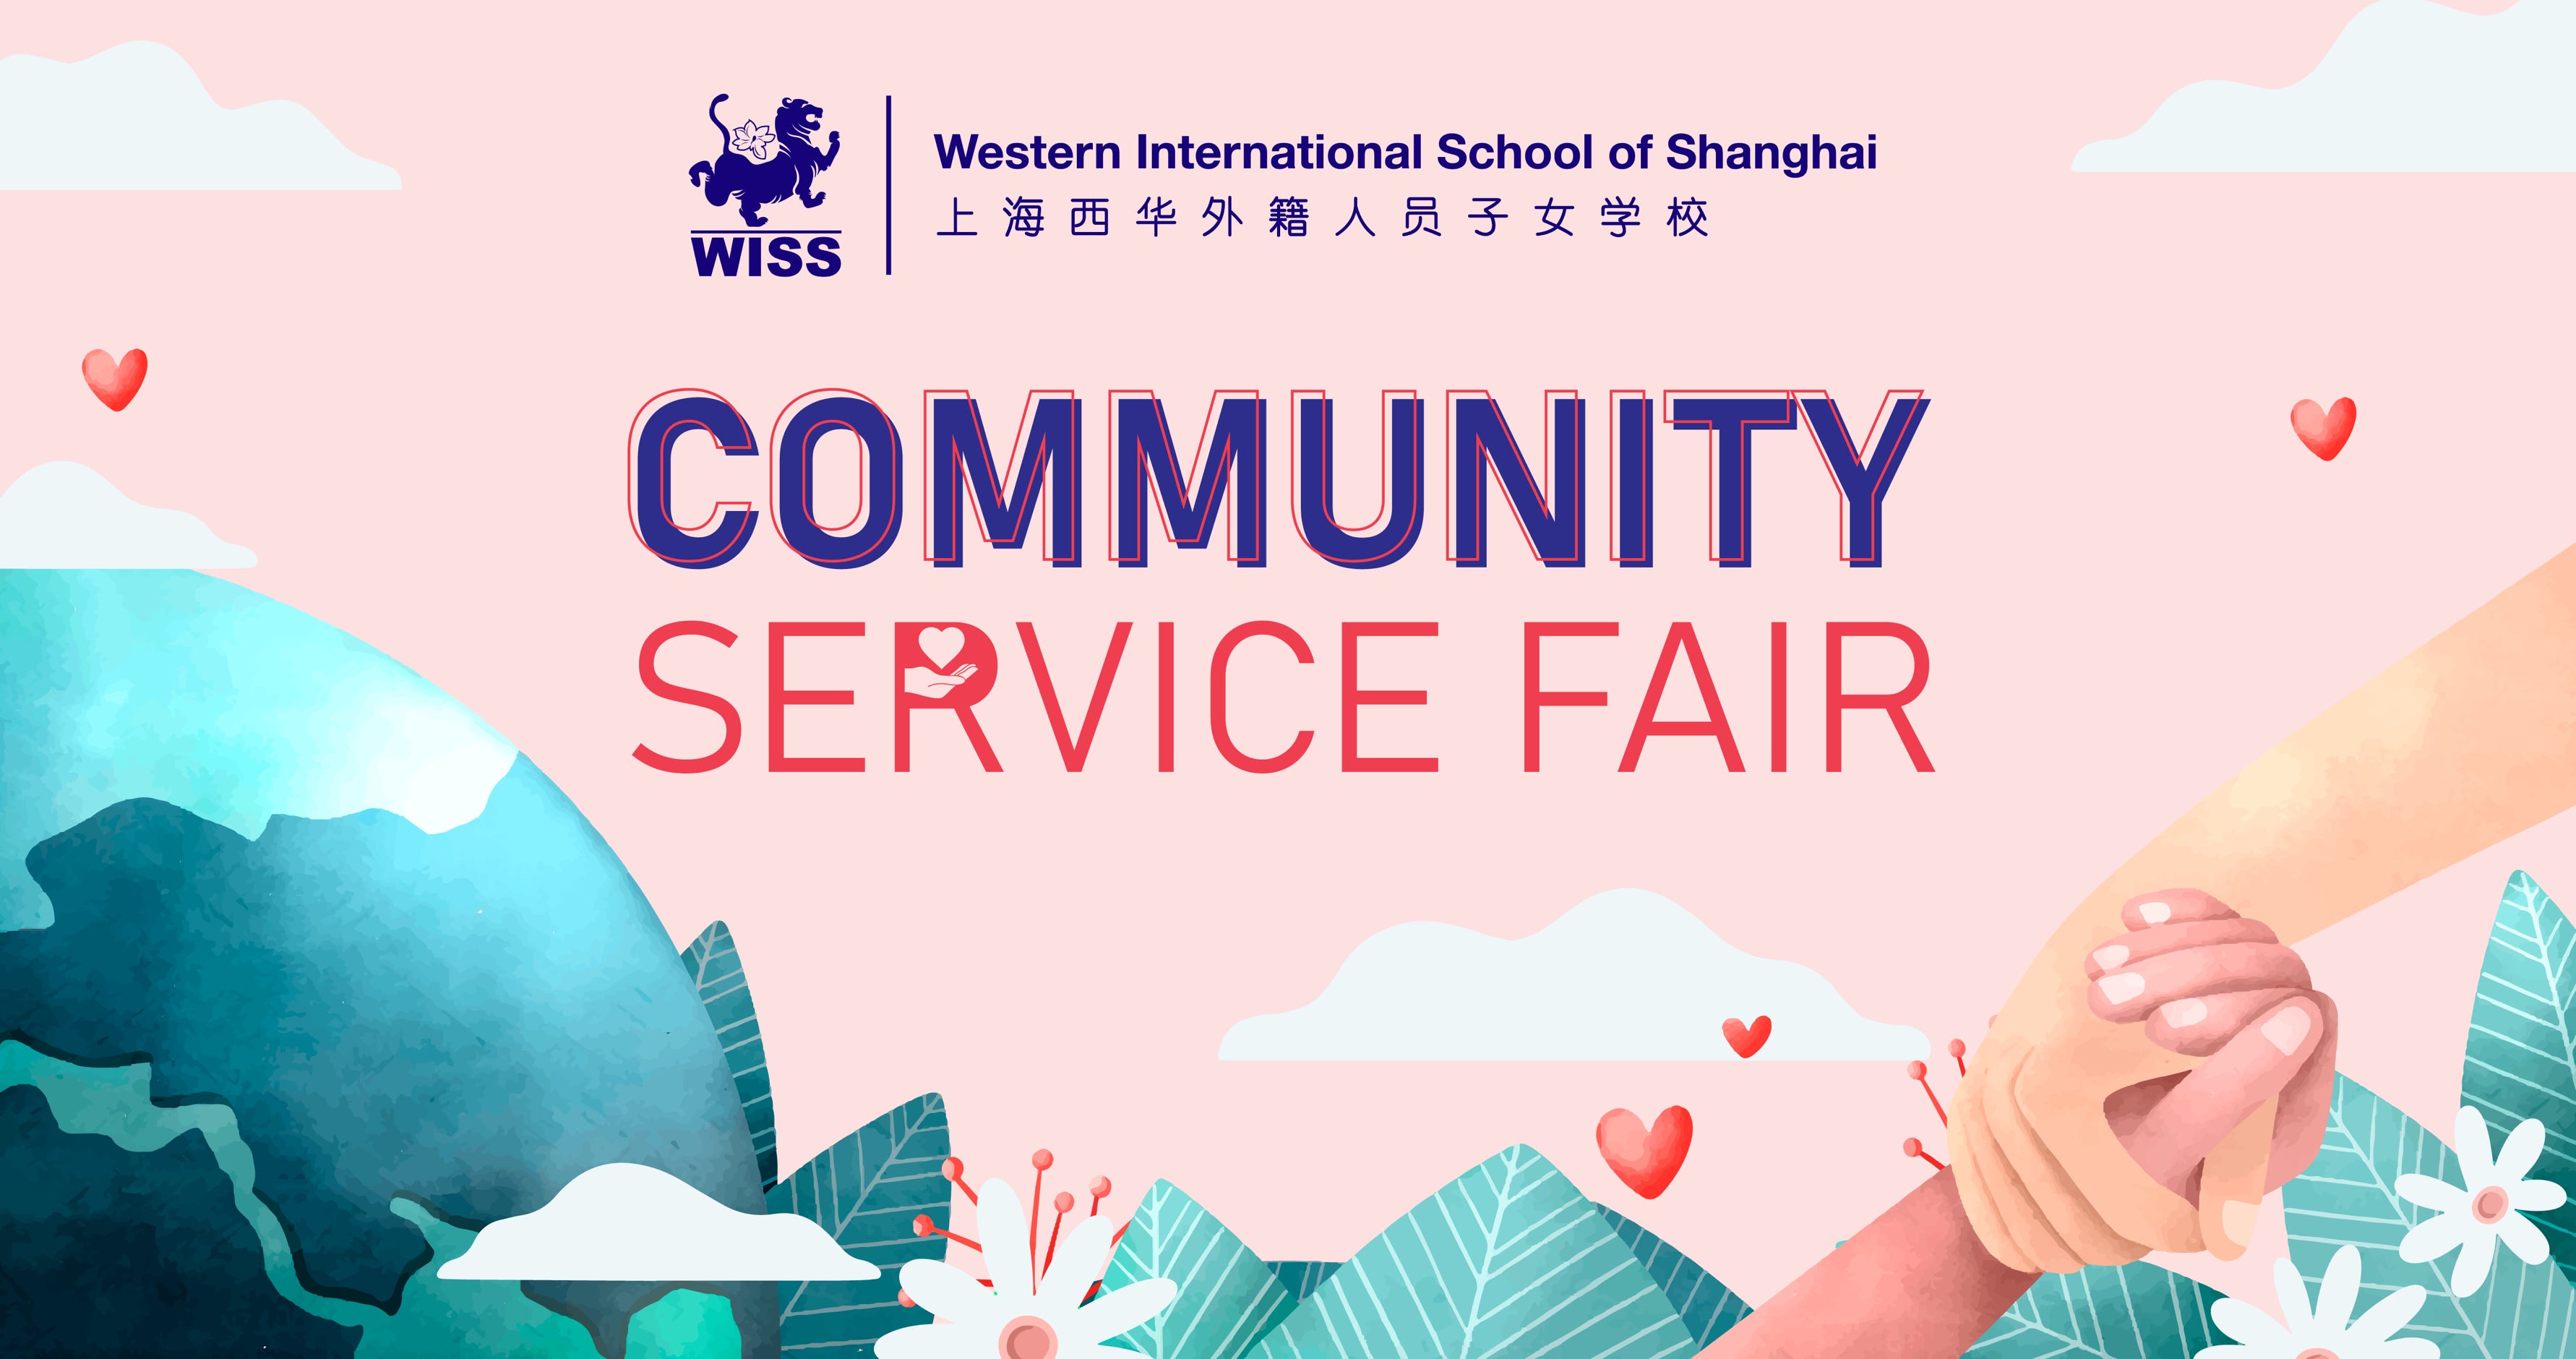 The Western International School of Shanghai (WISS) has a rich history of actively serving its community through a variety of impactful initiatives. One standout effort is the recent WISS Community Service Fair, which exemplifies the school's unwavering dedication to community engagement and social responsibility.   Community service at WISS transcends mere volunteerism; it is deeply ingrained in the school's academic curriculum. Students leverage their acquired knowledge and skills from academic courses to tackle real-world challenges, effectively bridging the gap between theory and practice. This hands-on educational approach equips students with the tools to address intricate societal issues and become proactive change-makers.